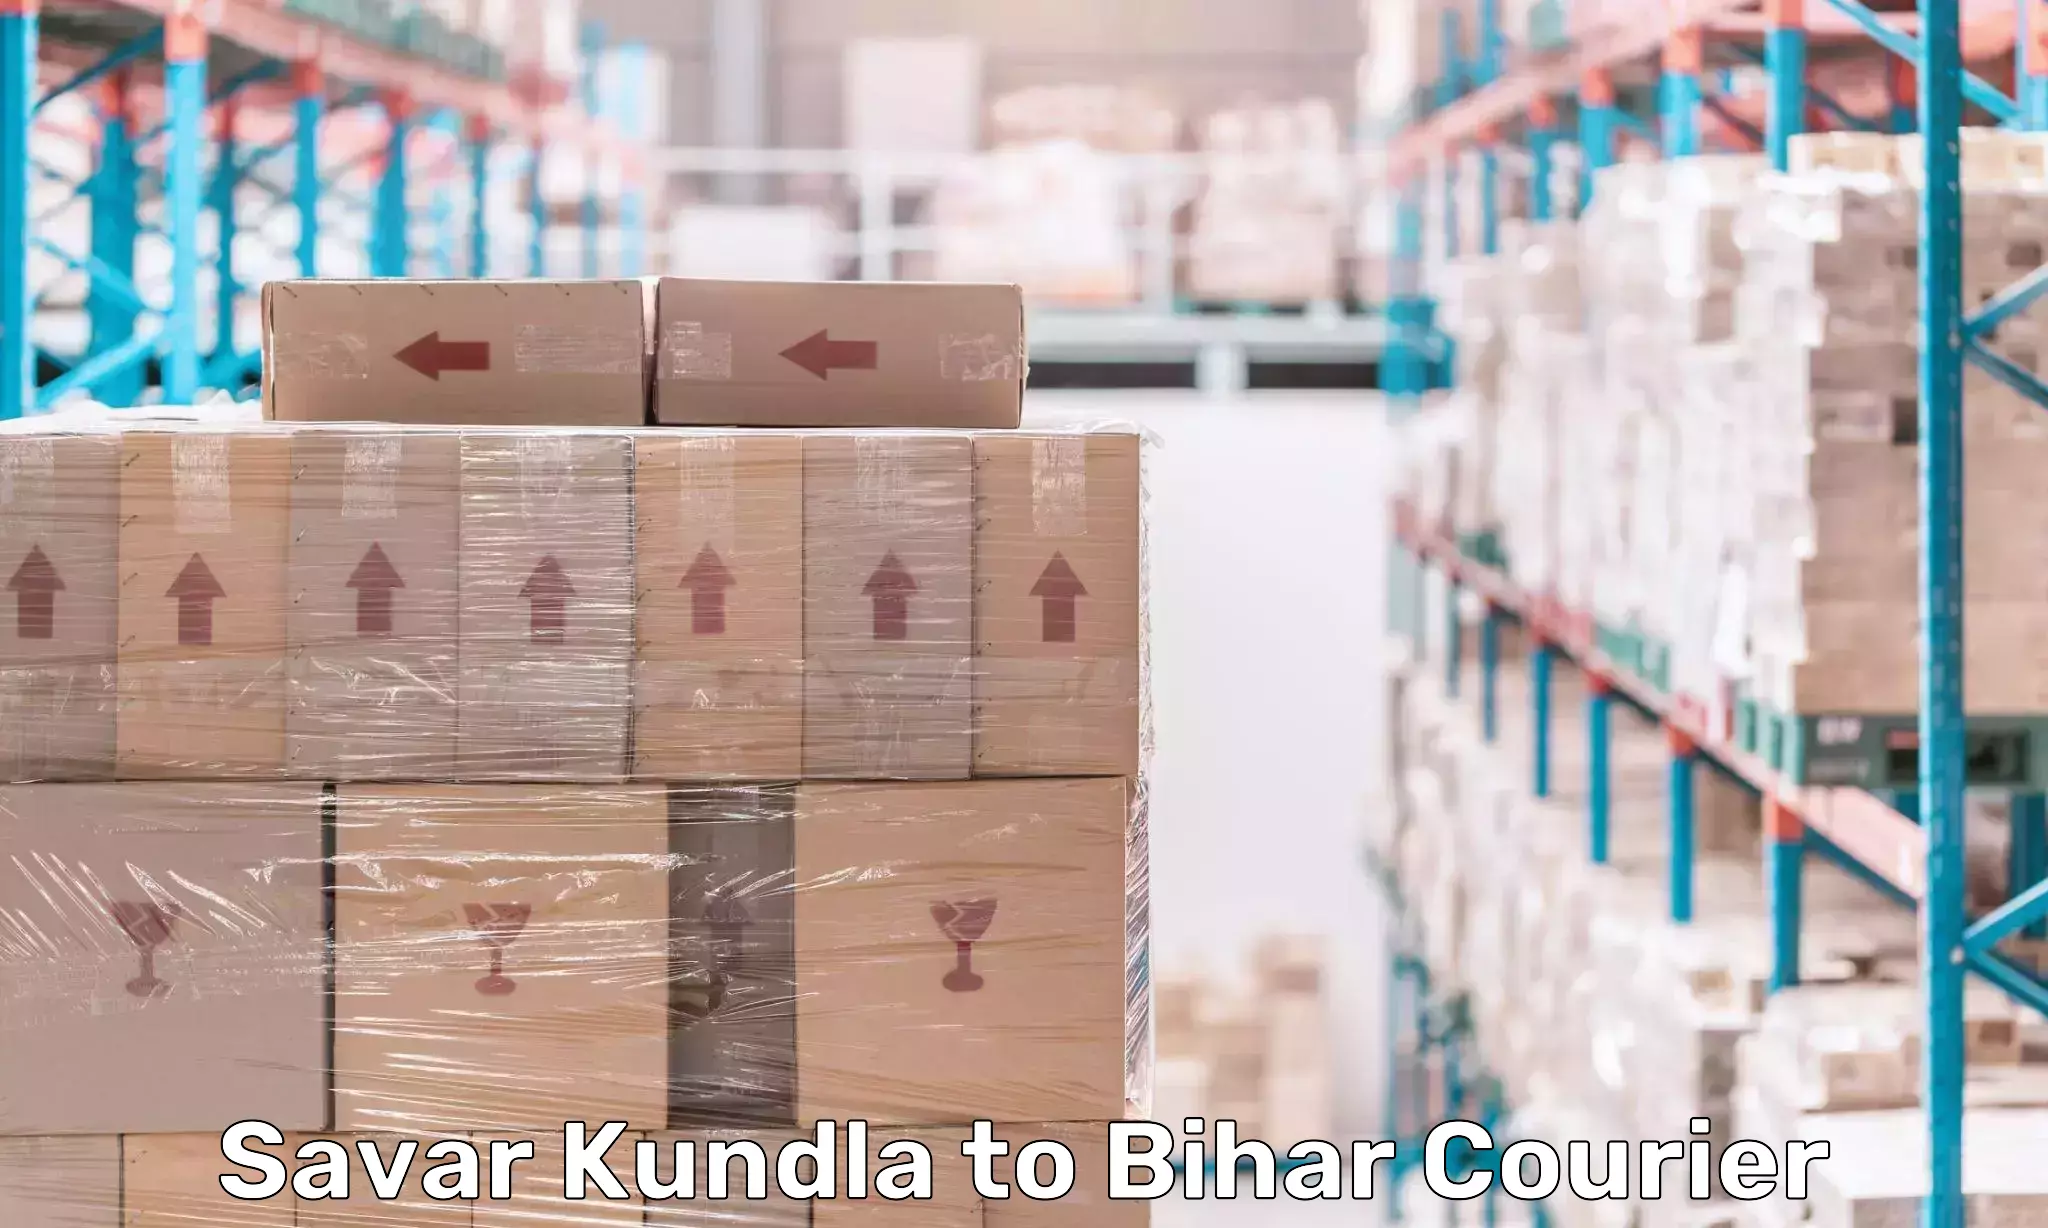 Large-scale shipping solutions Savar Kundla to Bhojpur